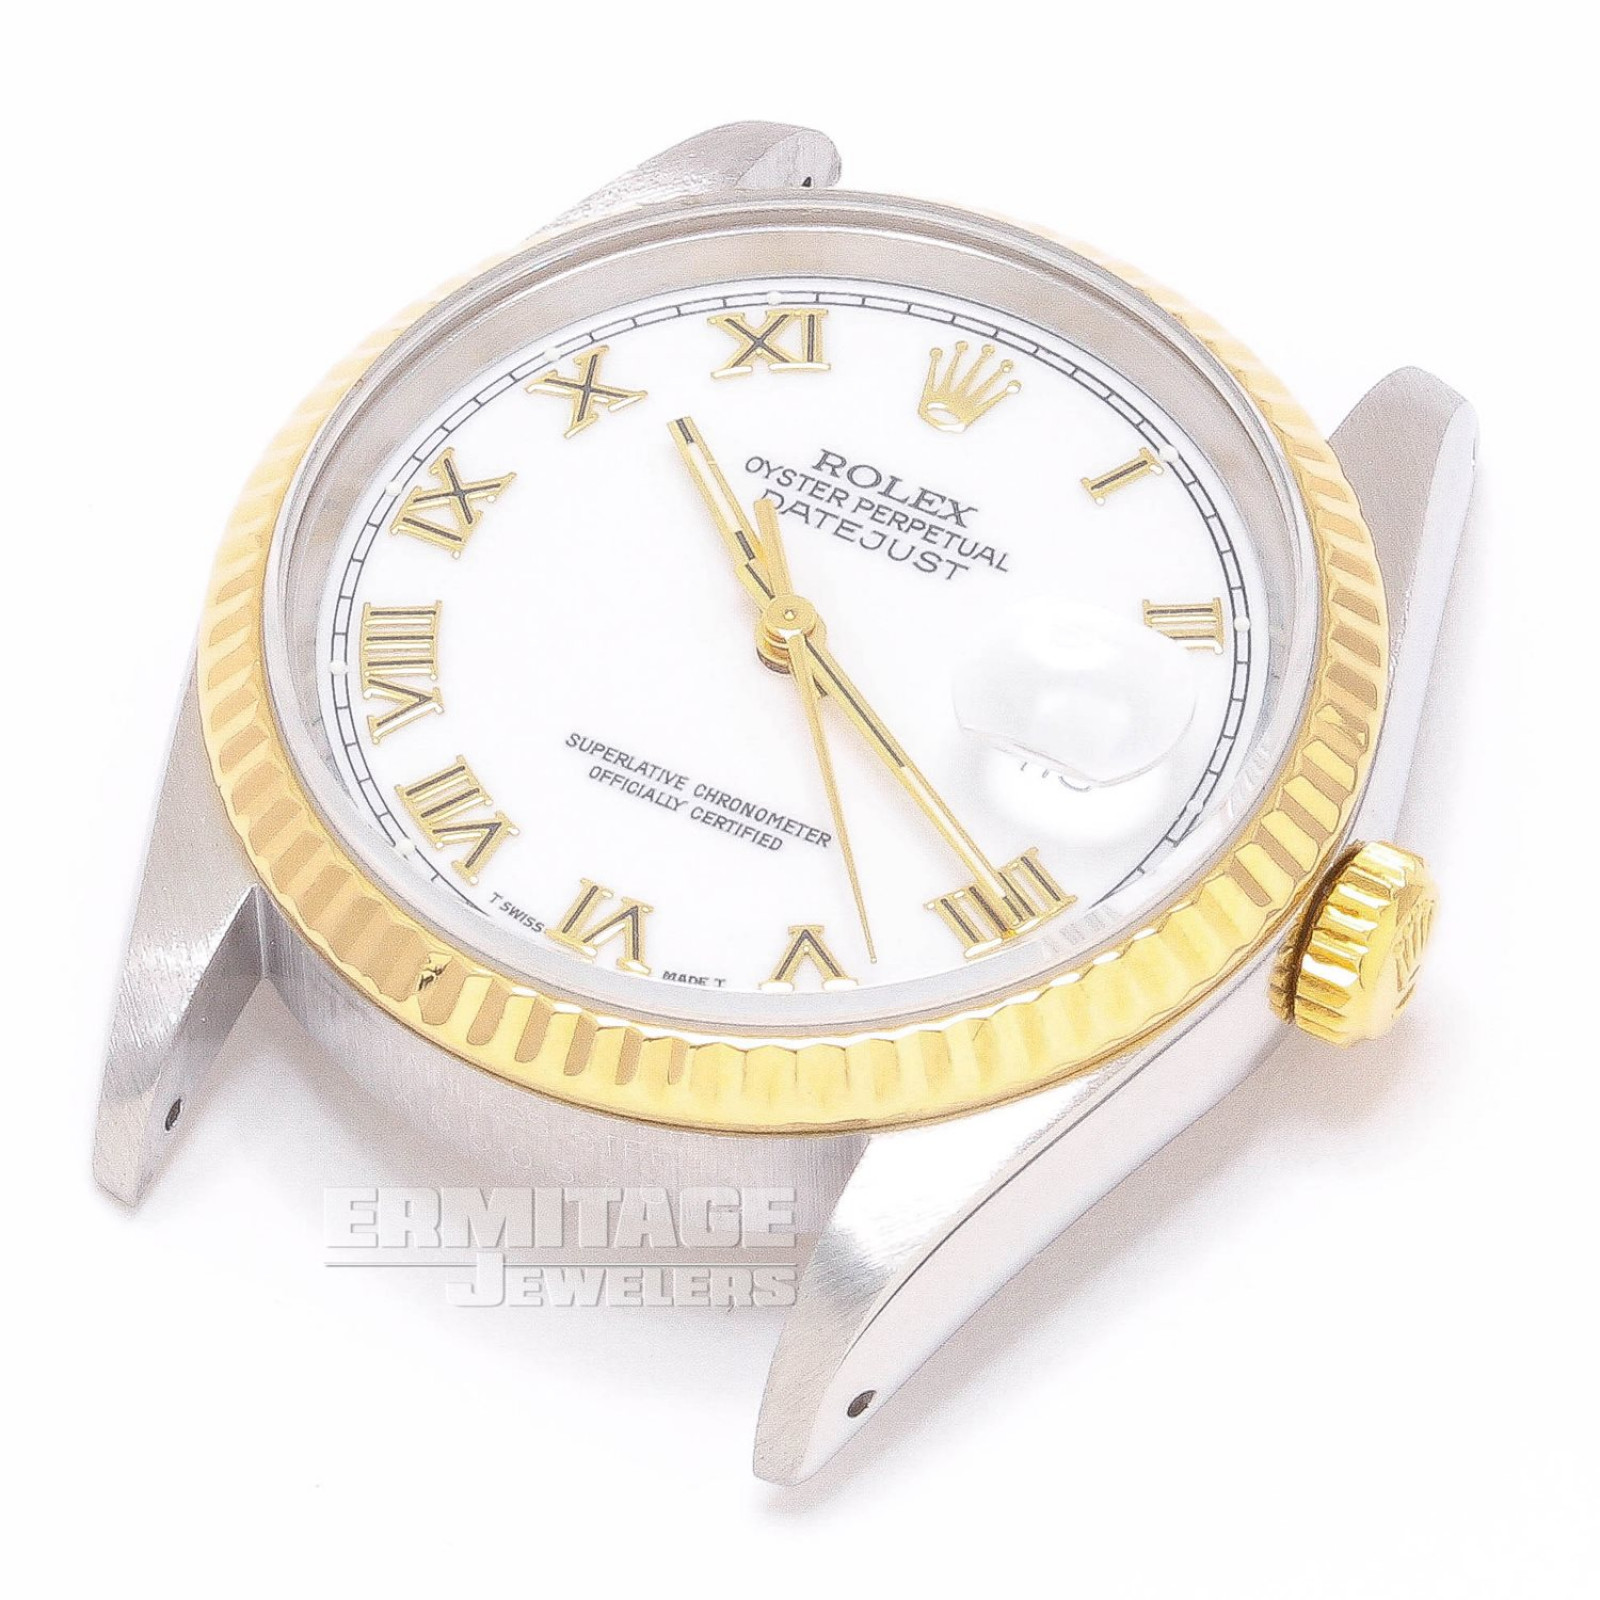 Rolex Datejust 16233 with White Dial